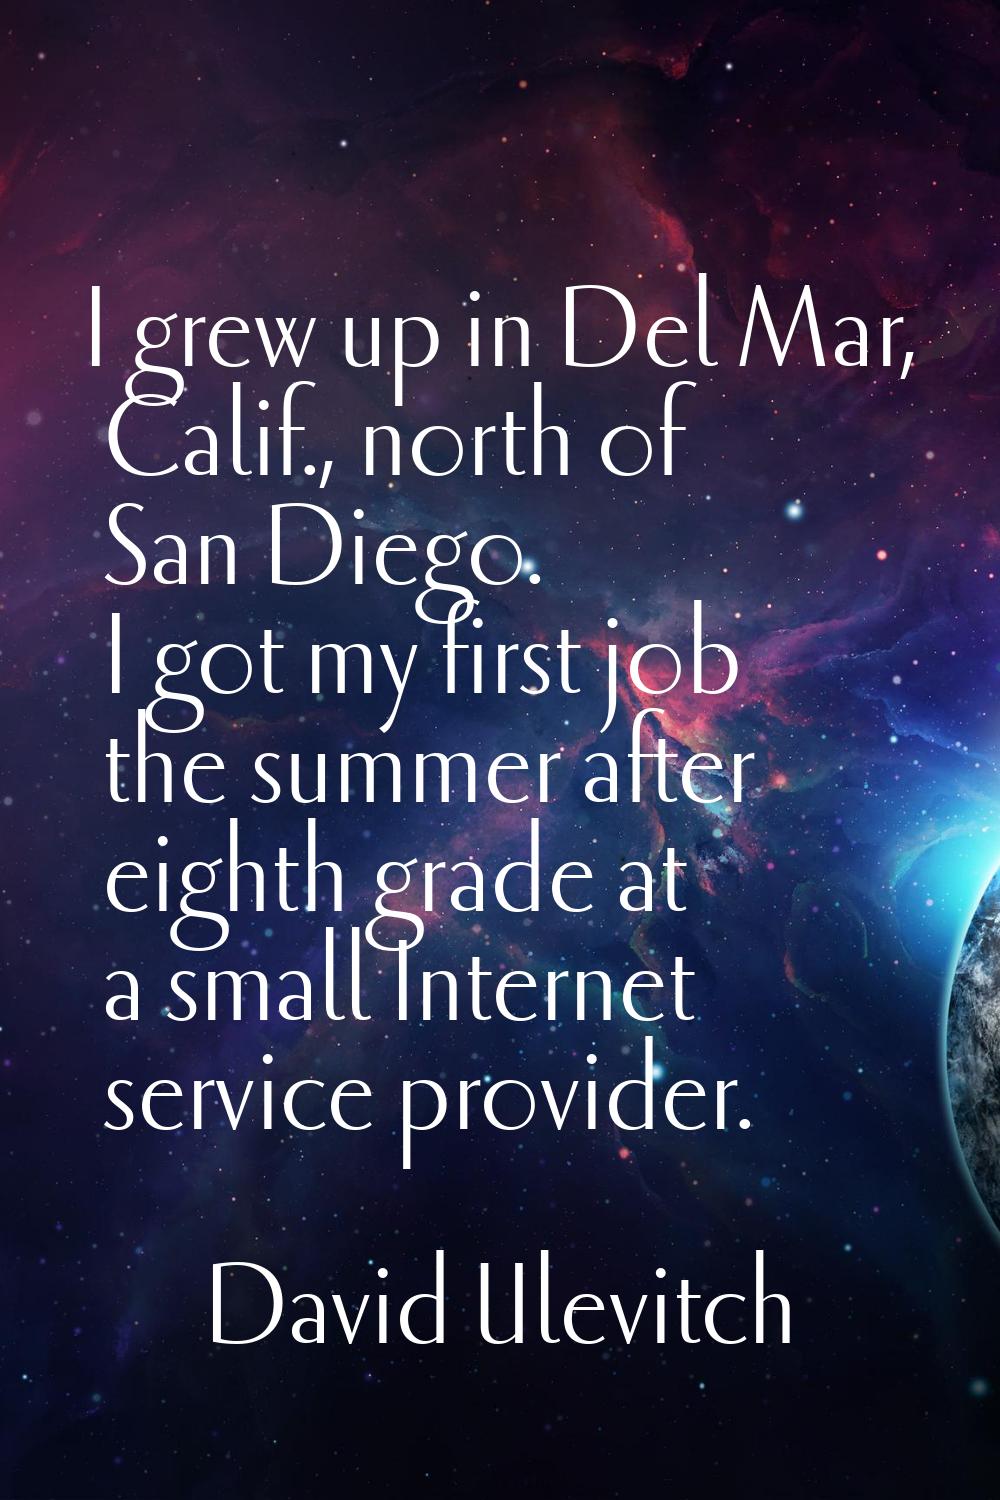 I grew up in Del Mar, Calif., north of San Diego. I got my first job the summer after eighth grade 